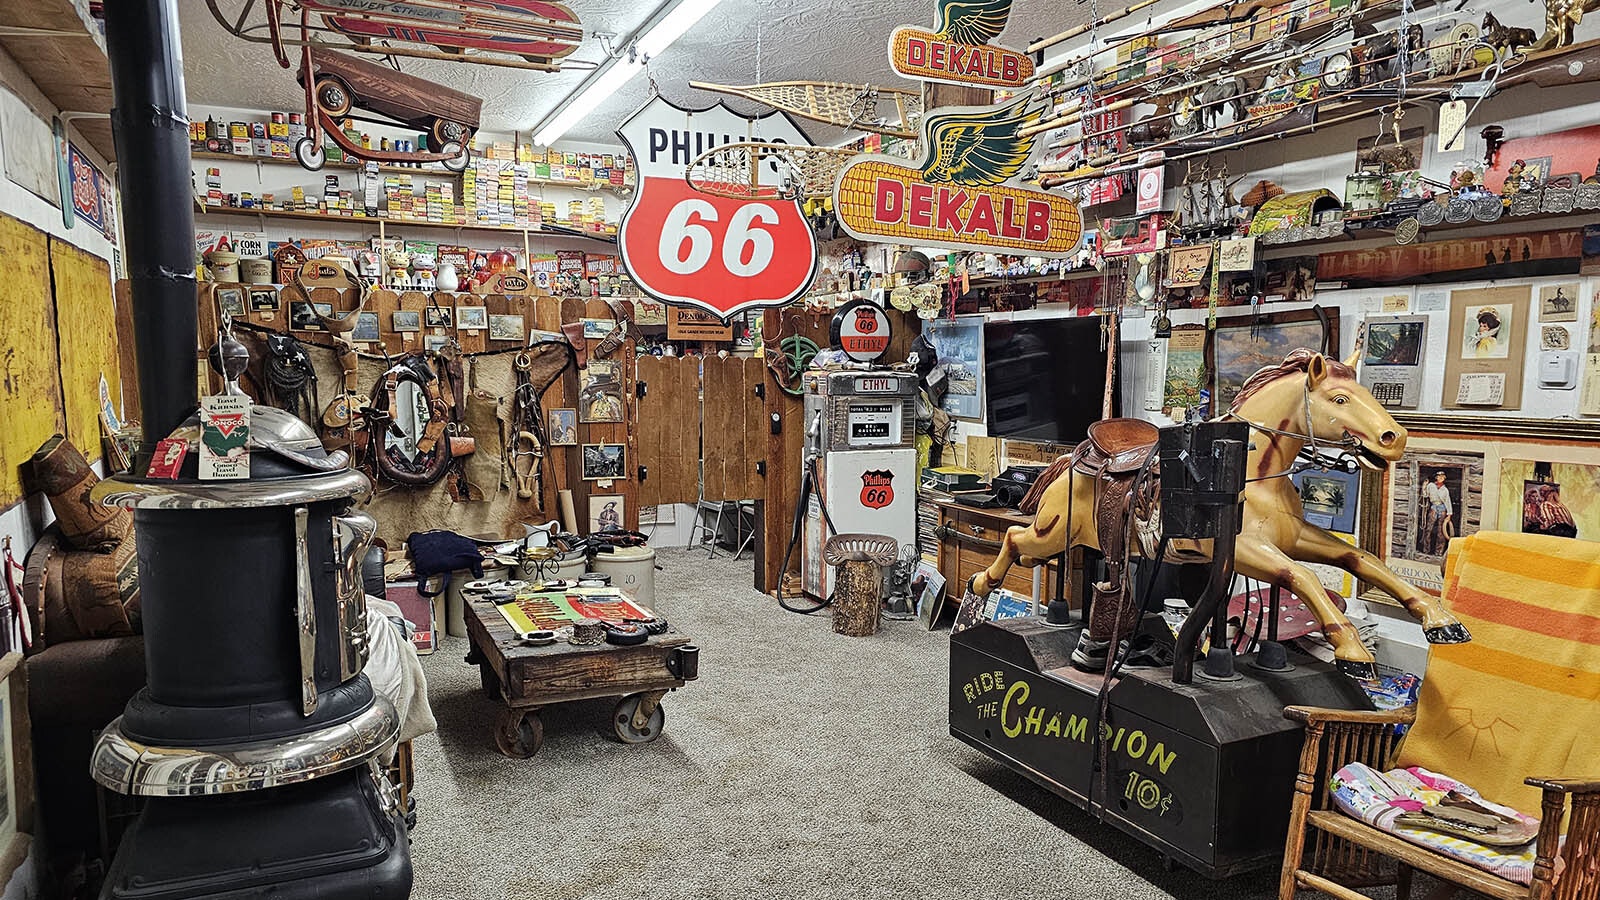 Dave Stephens has set up one part of what could have been a four-car garage with all the memorabilia he's collected over a lifetime of collecting and being an auctioneer in the Sublette County area.